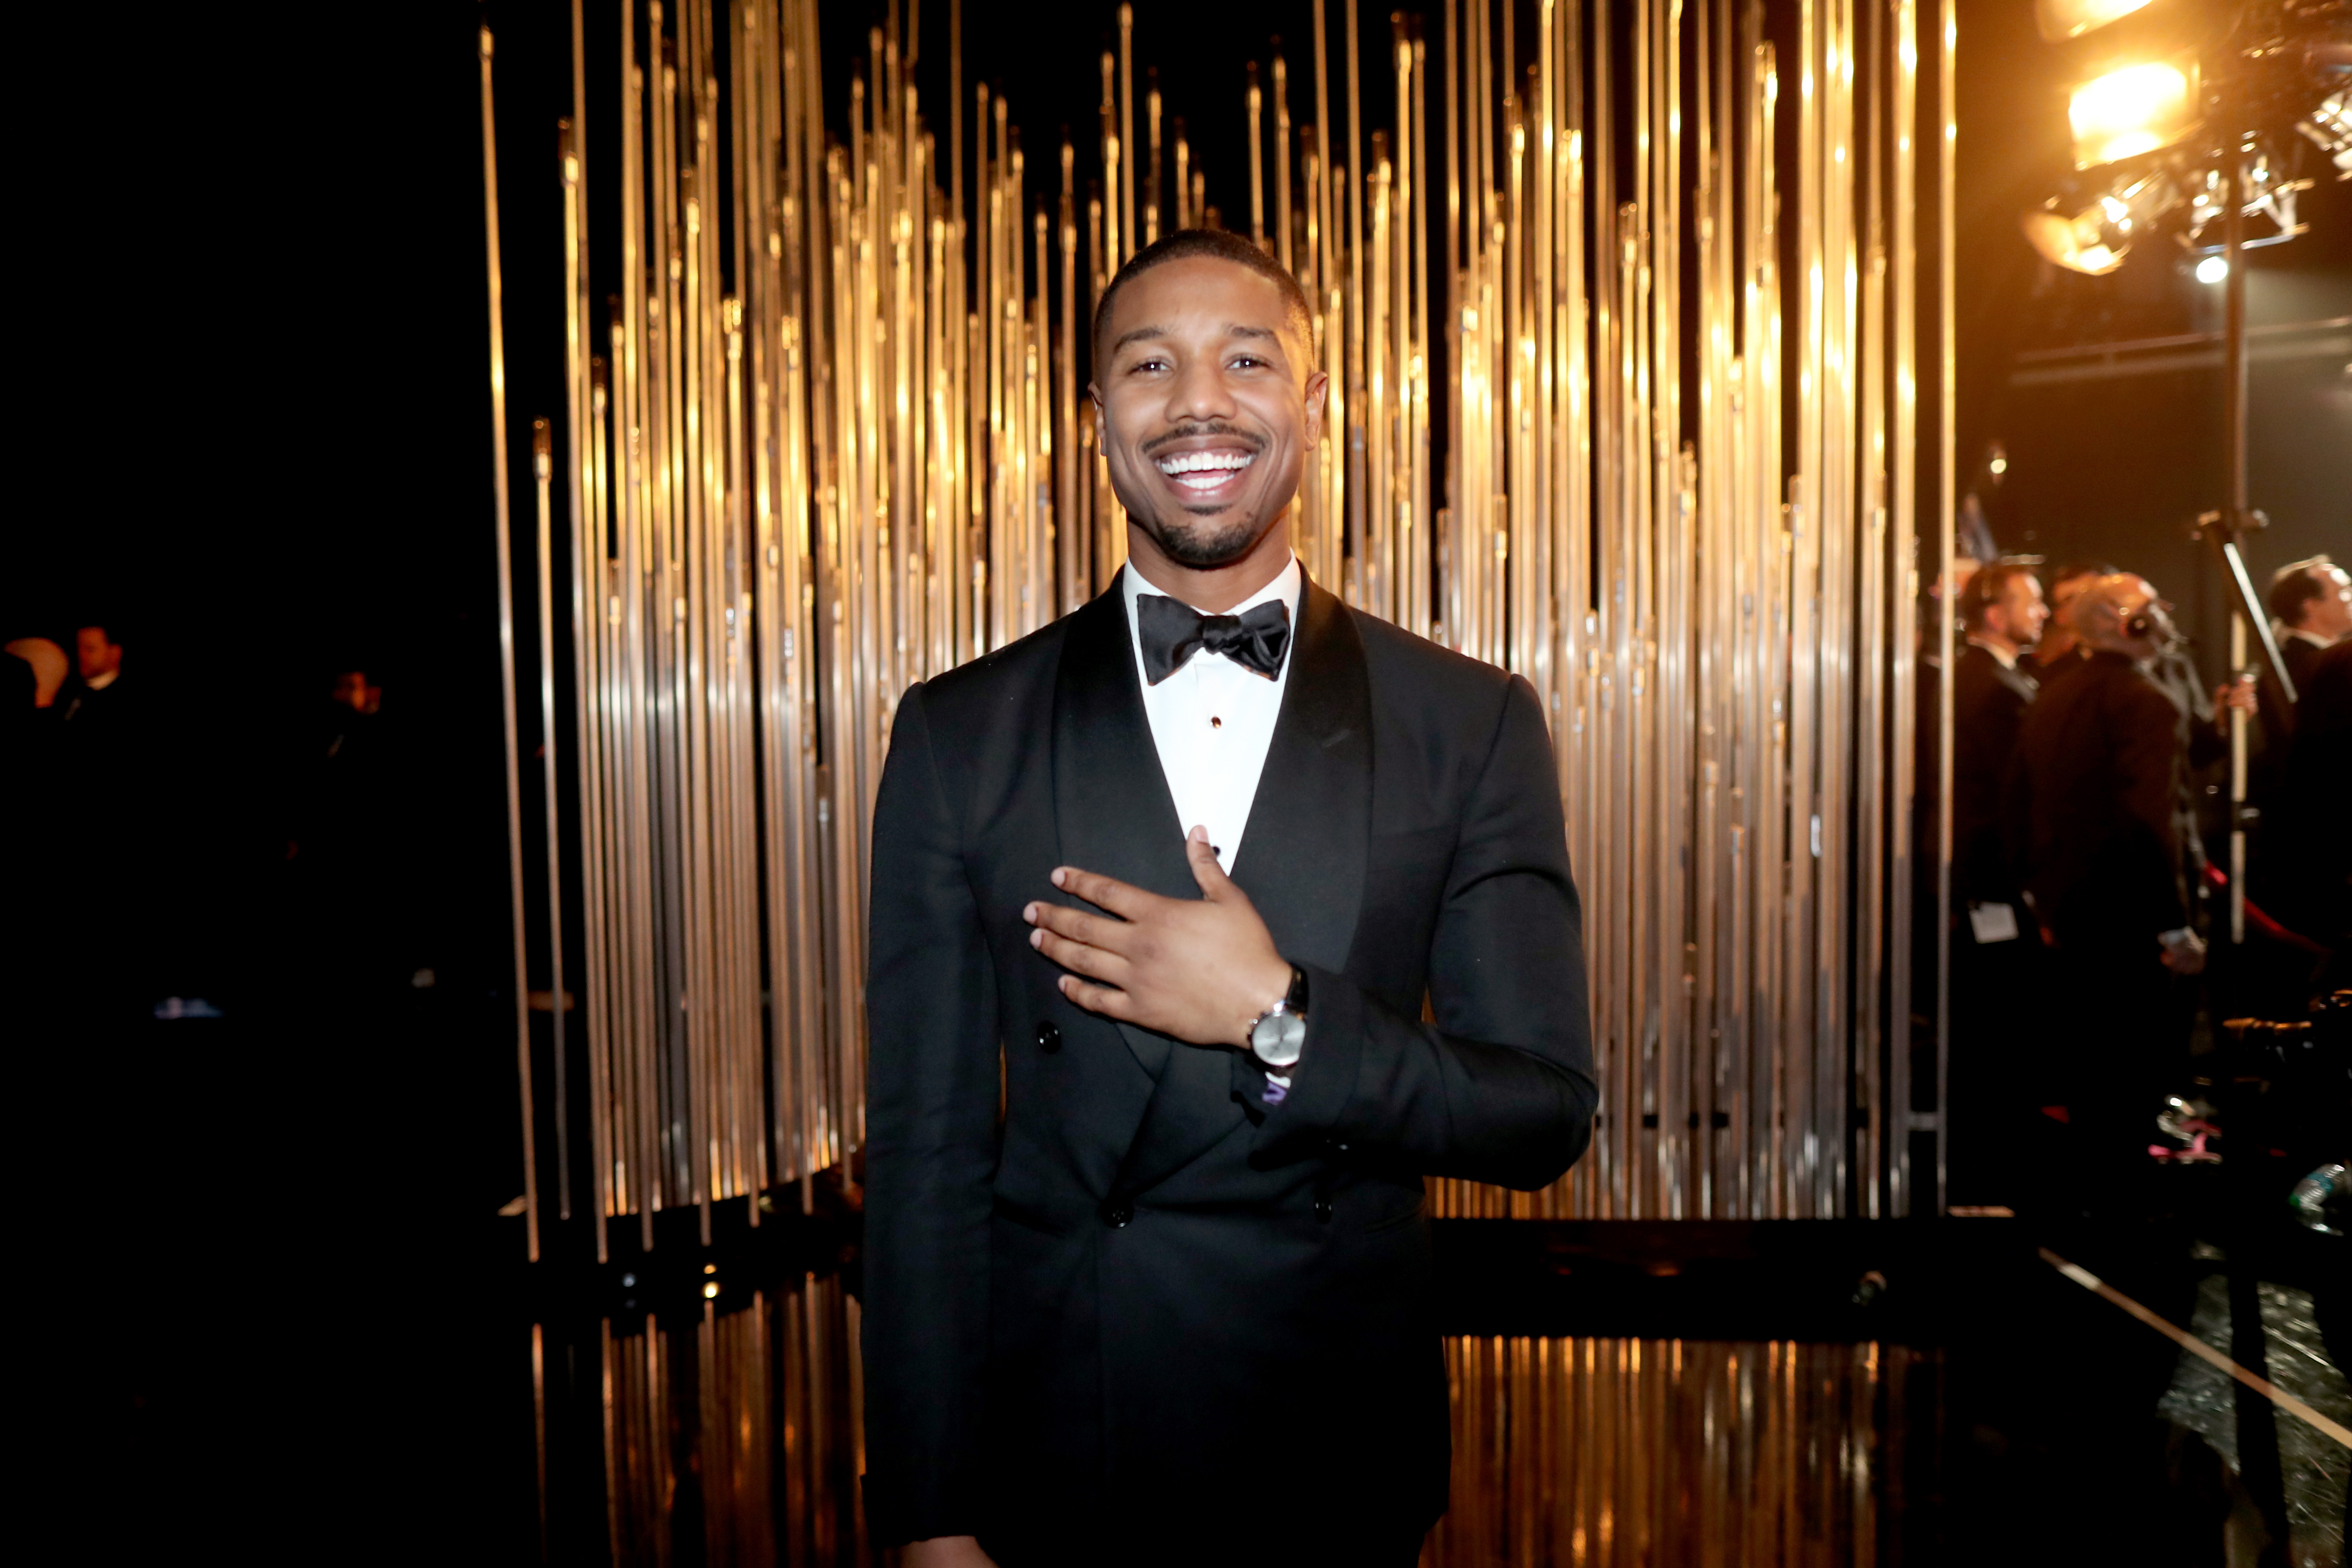 Michael B. Jordan backstage at the 88th Annual Academy Awards at Dolby Theatre on February 28, 2016 in Hollywood, California | Source: Getty Images